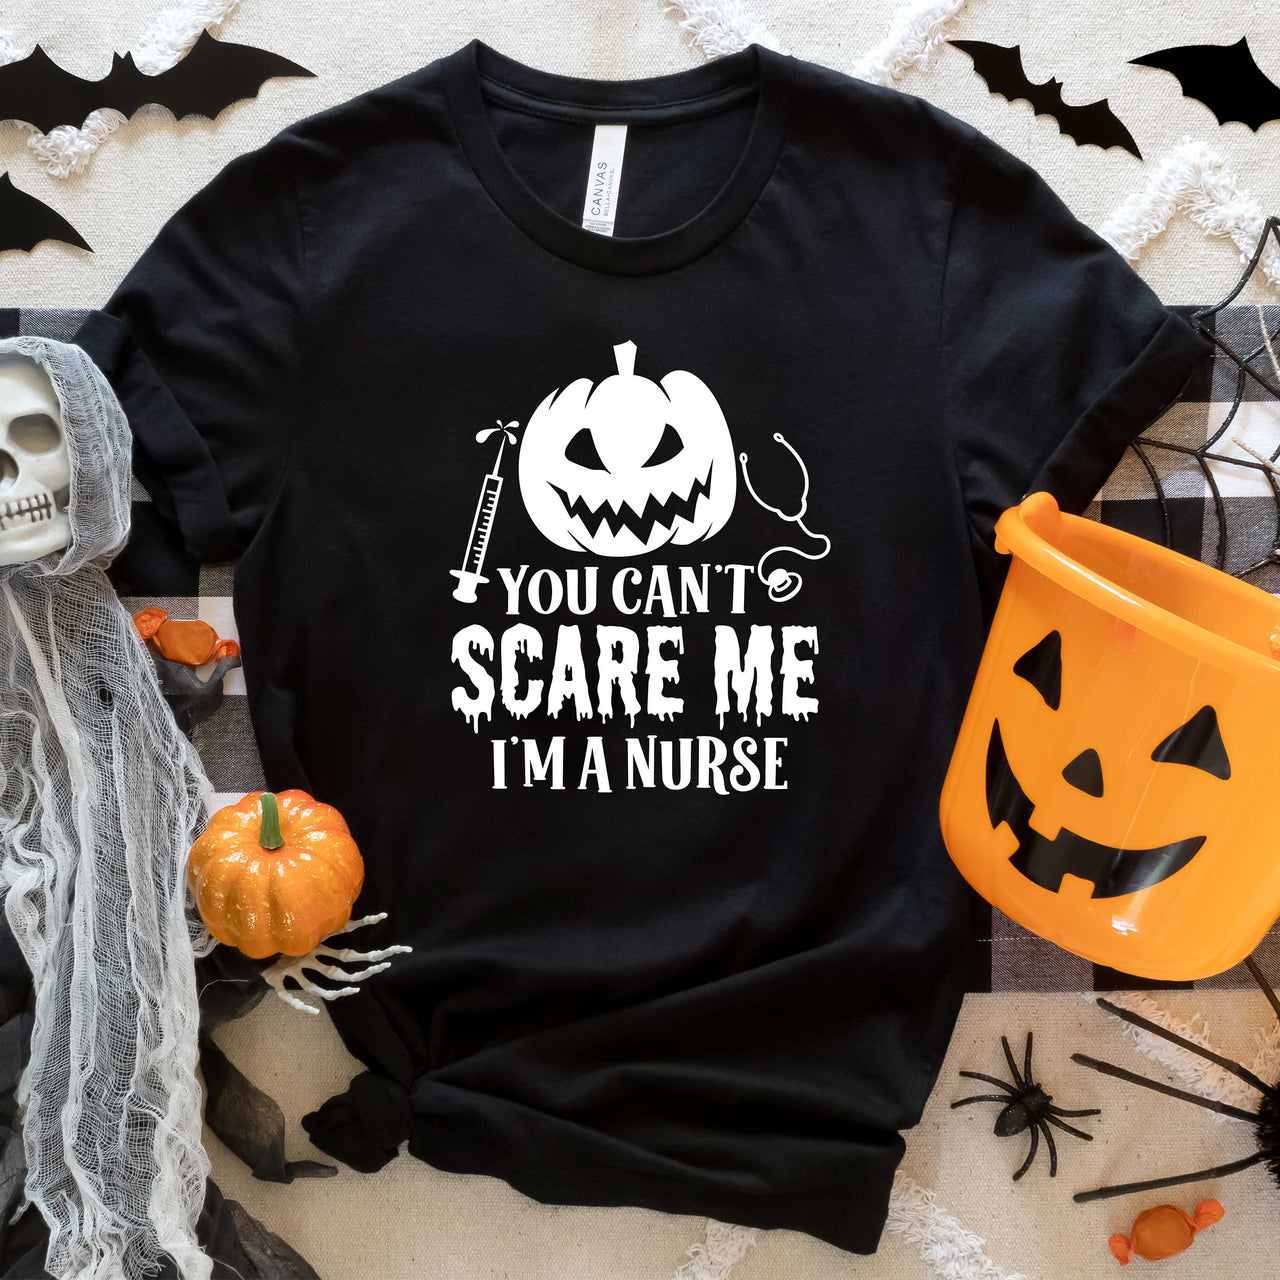 You Can't Scare Me I'm a Nurse T-Shirt